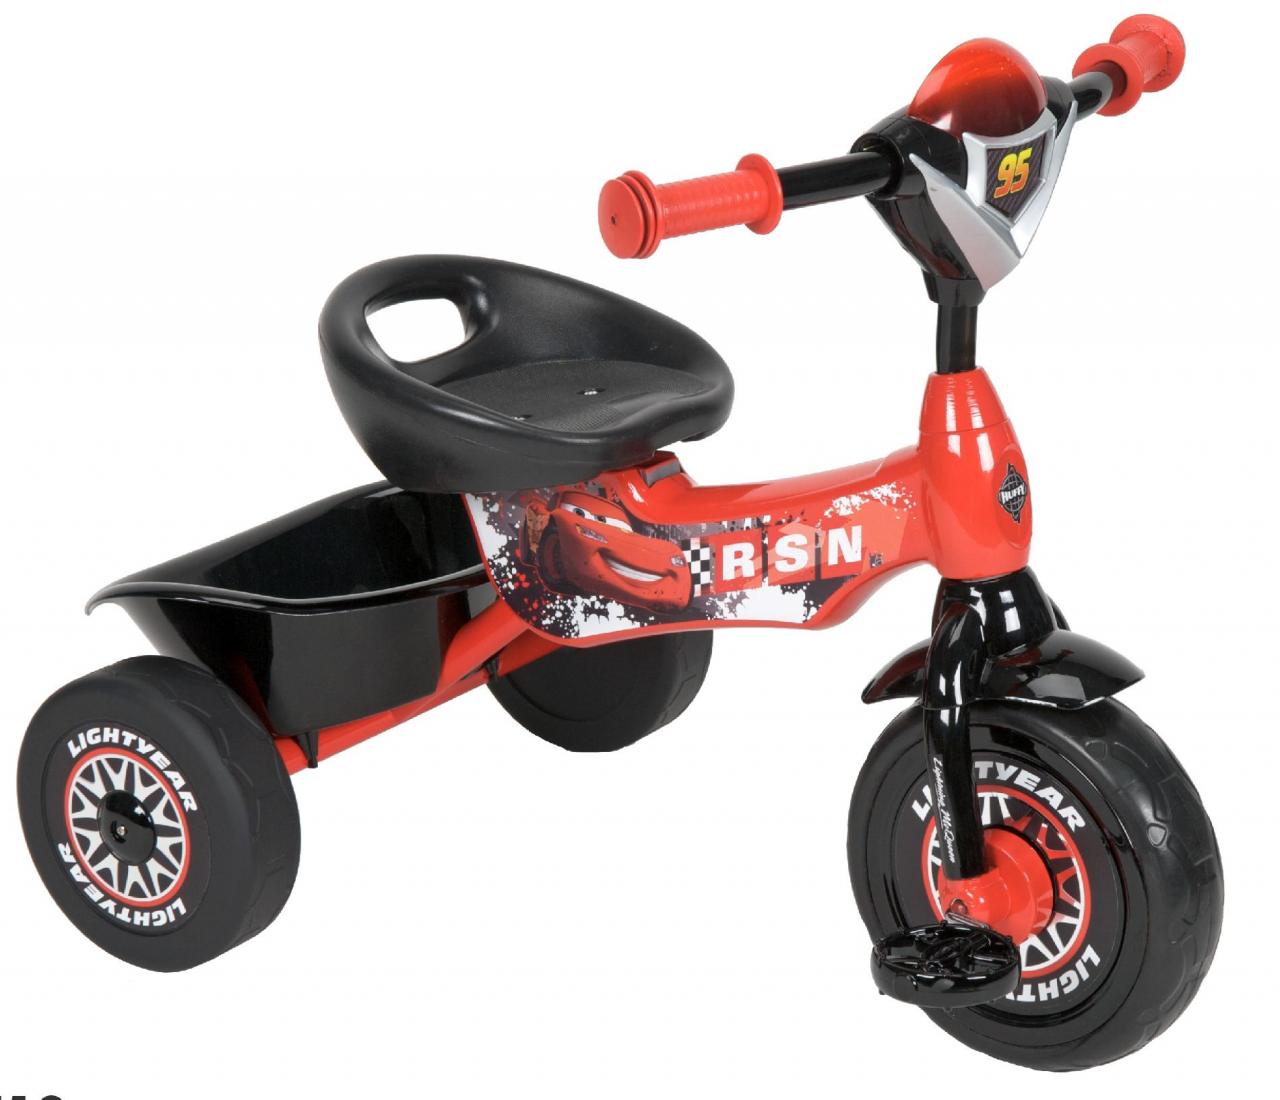 Disney Pixar Cars Tricycle Enjoy a Fun and Zippy Ride from Sears